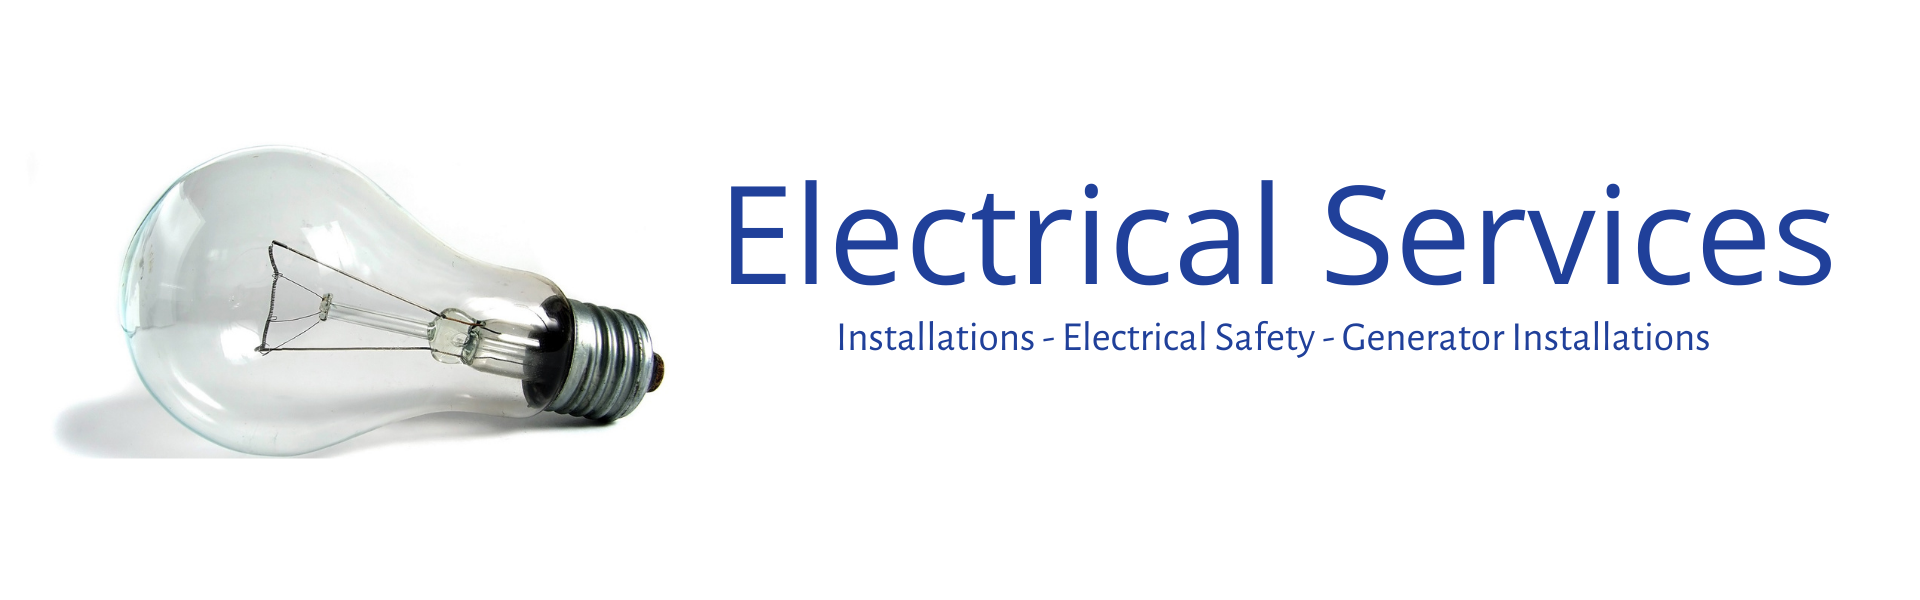 Electrical Services and a lightbulb 